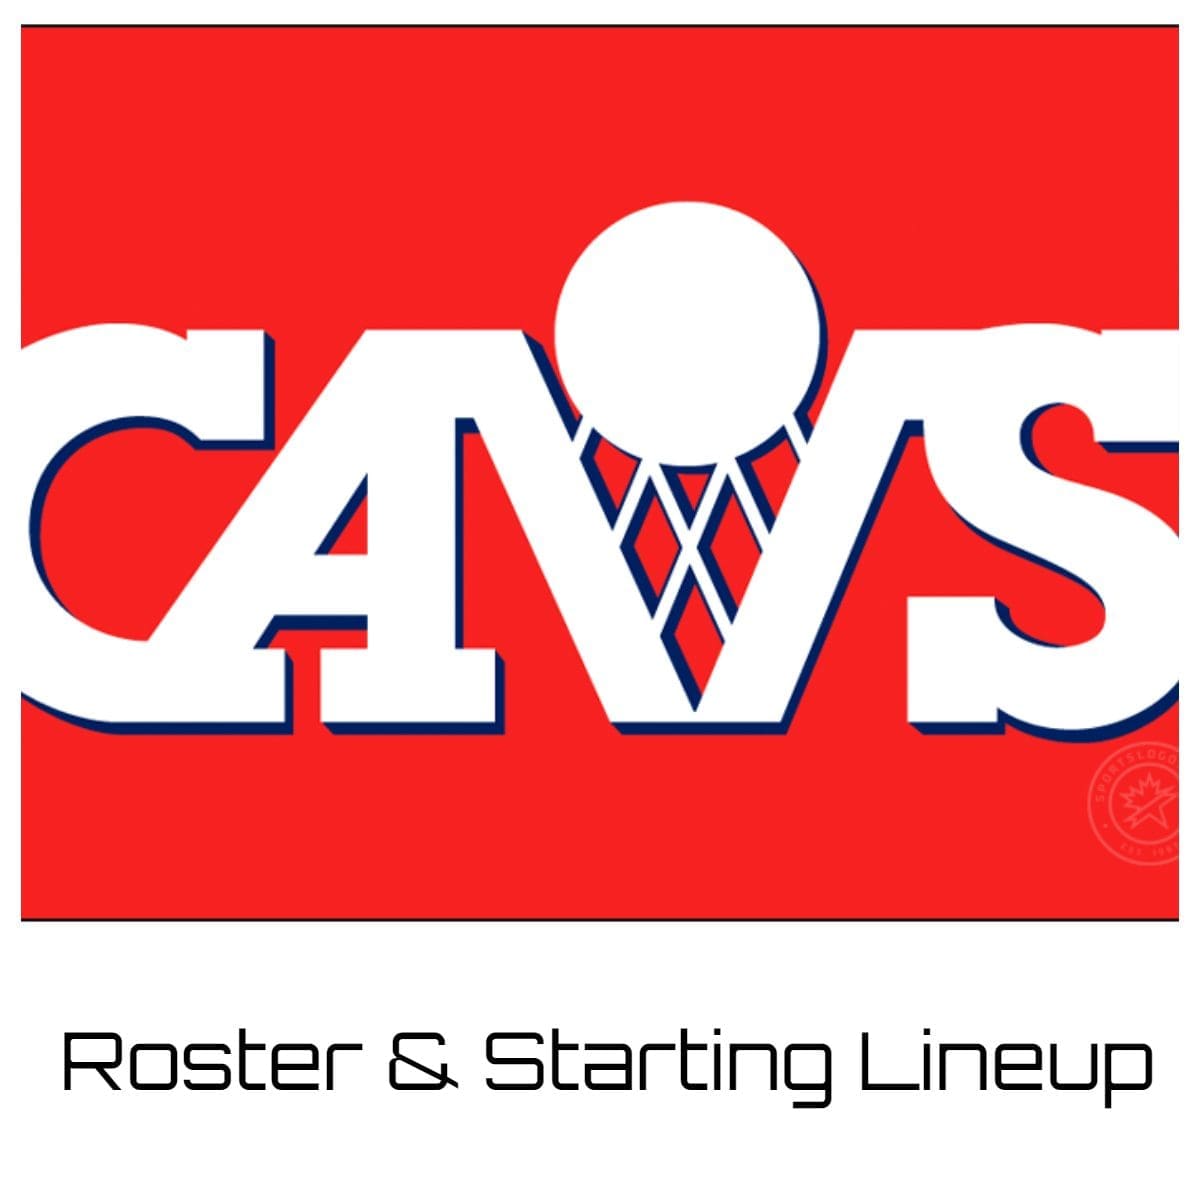 Cleveland Cavaliers Roster